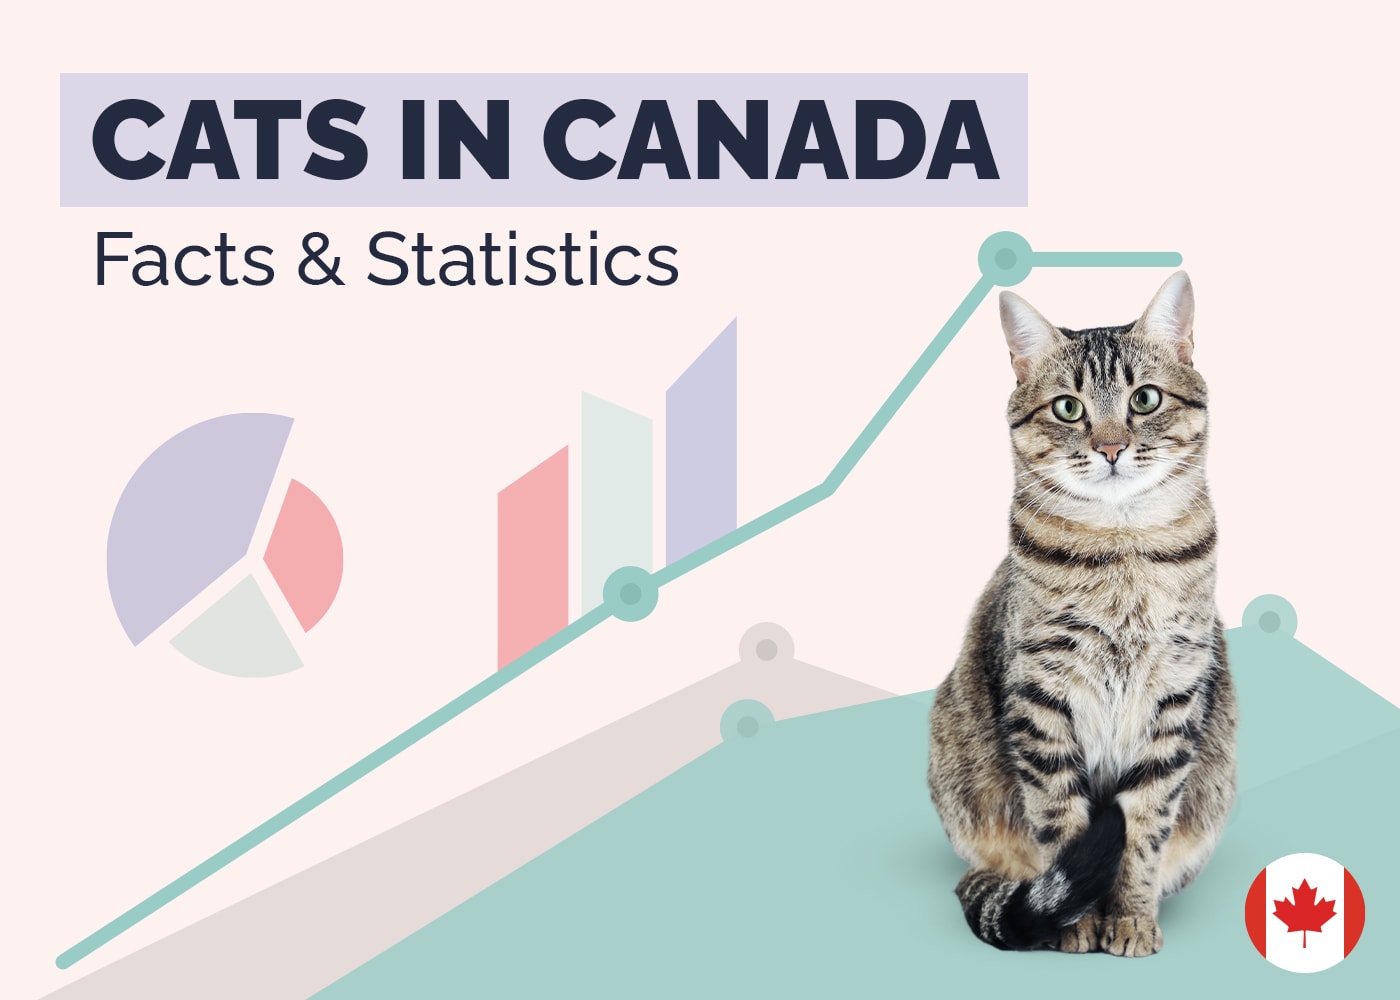 Cats in Canada Facts and Statistics